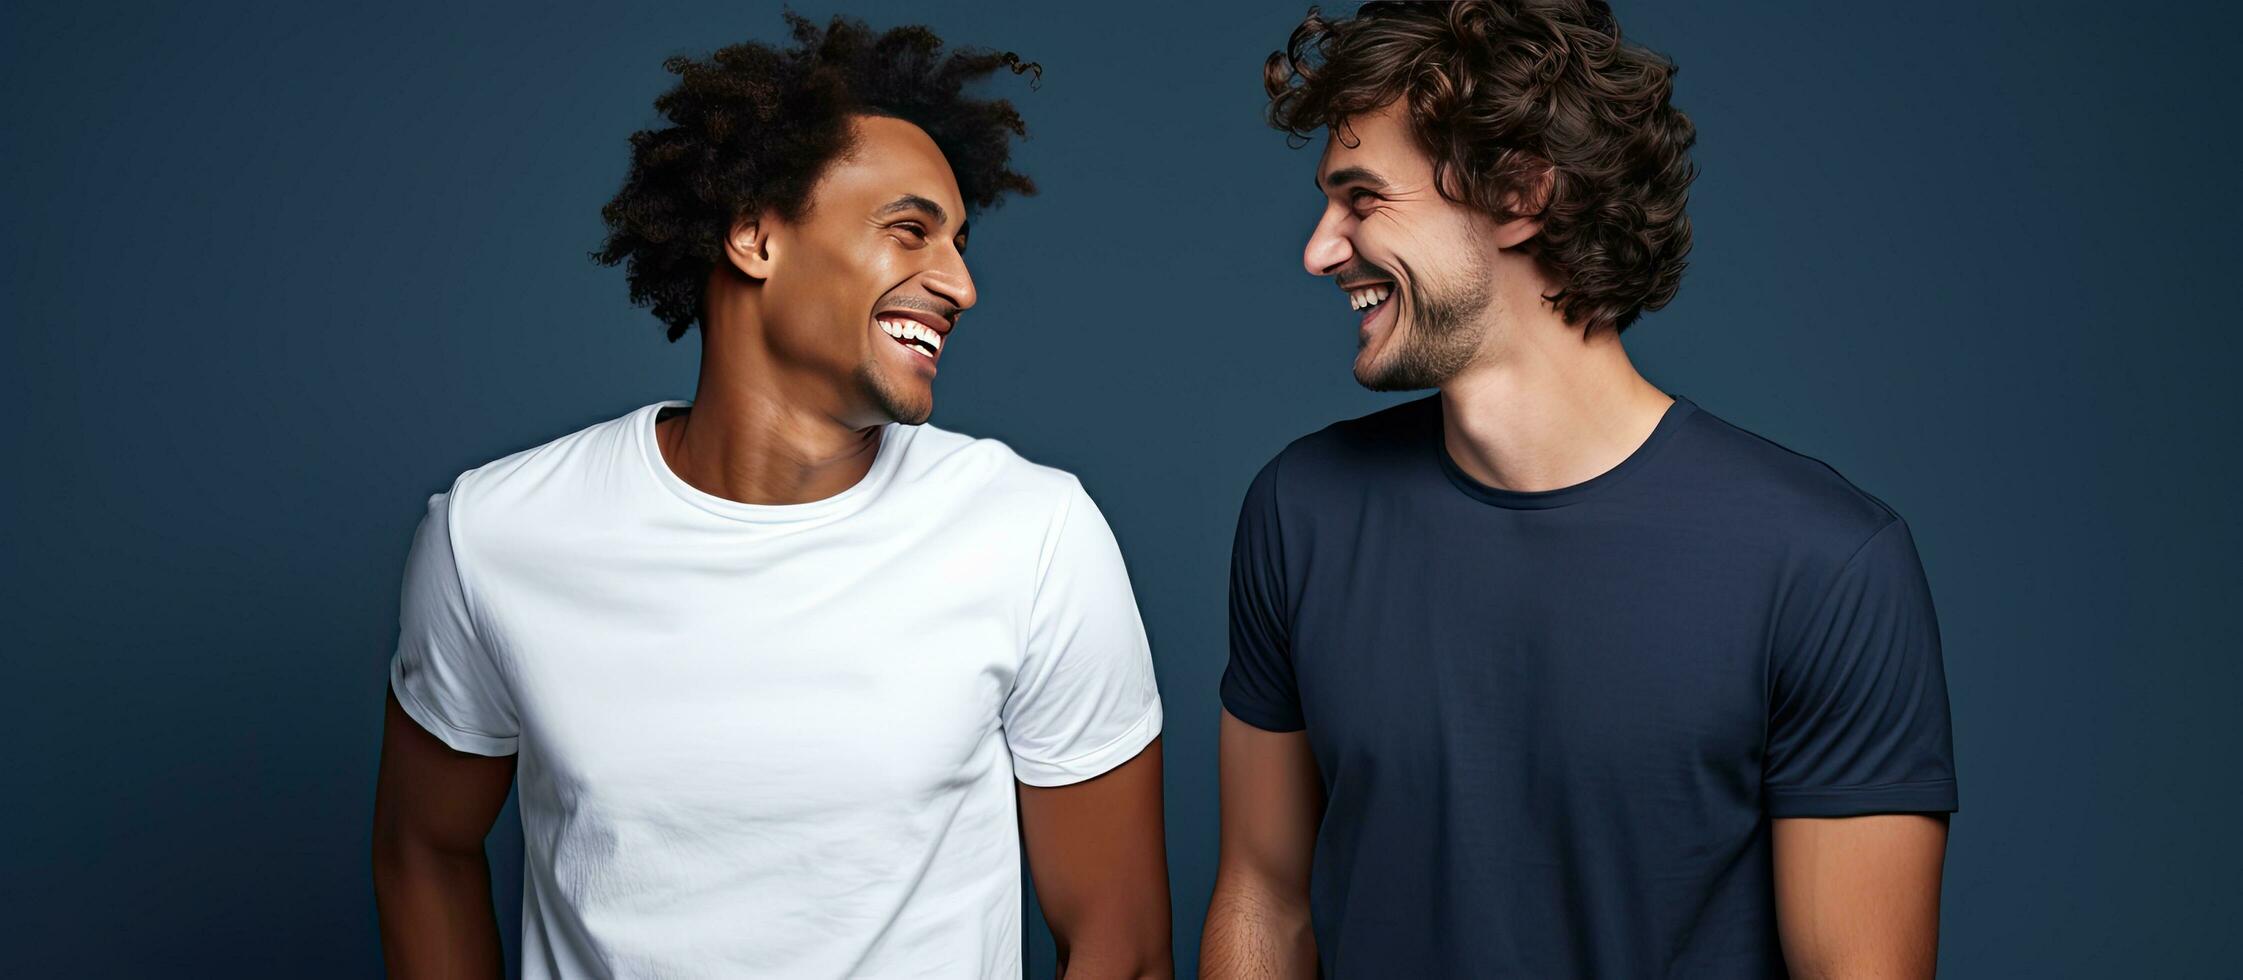 Two young men in their 20s wearing white casual shirts are happily talking together in a studio portrait with a dark blue background photo